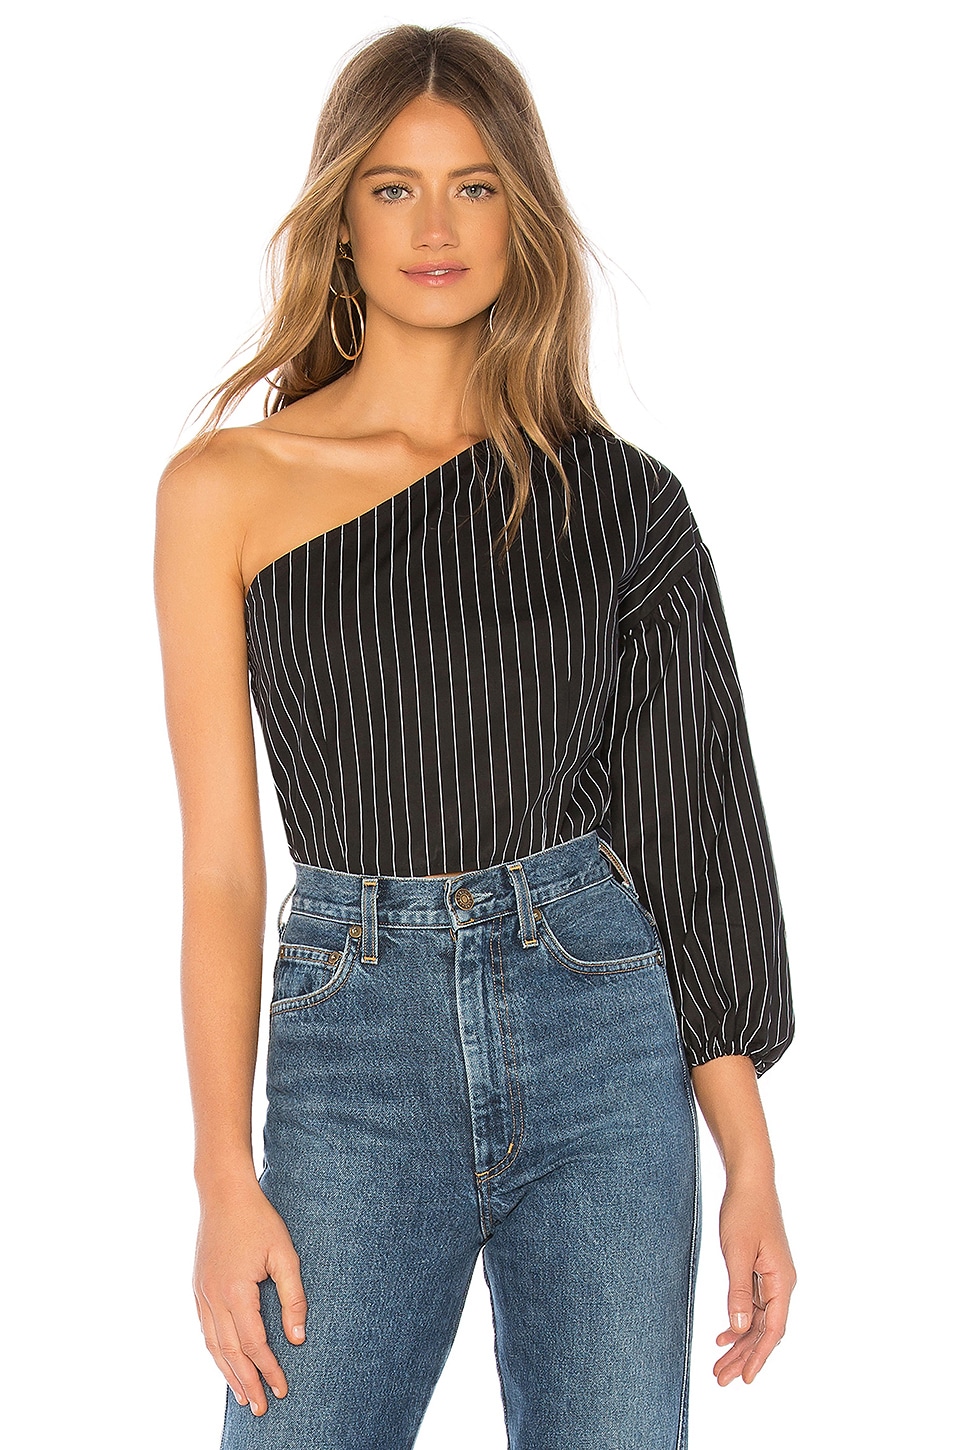 About Us Melenie Puff Sleeve Top in Black & White | REVOLVE